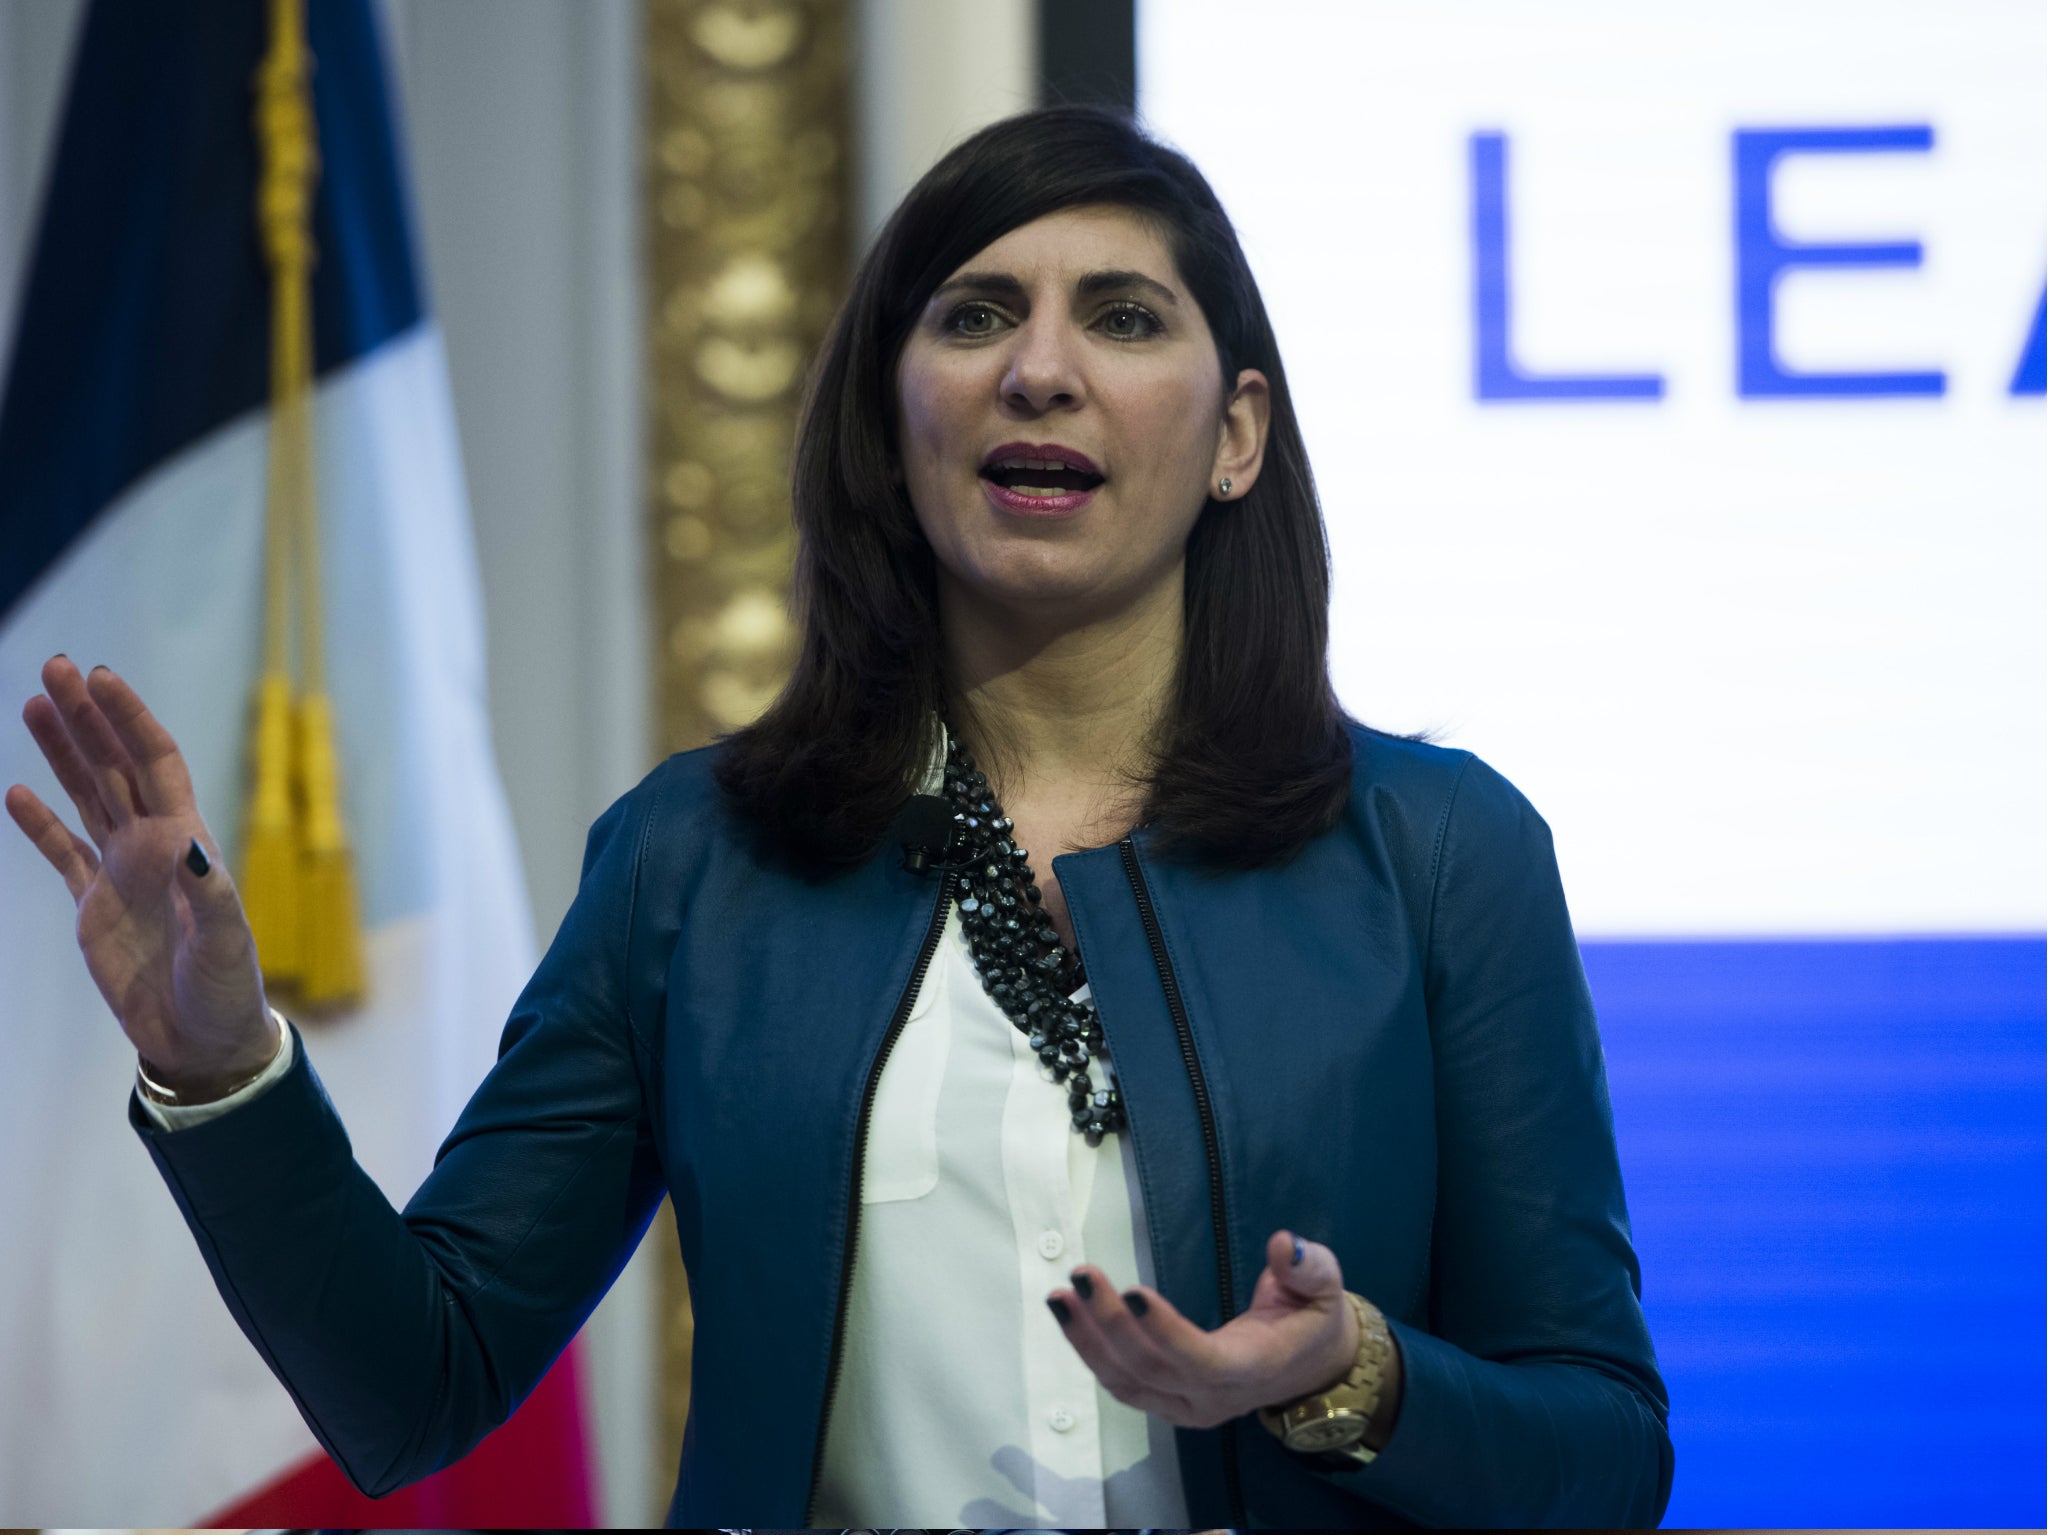 New York Stock Exchange (NYSE) names its first female president, Stacey Cunningham, in its 226-year history